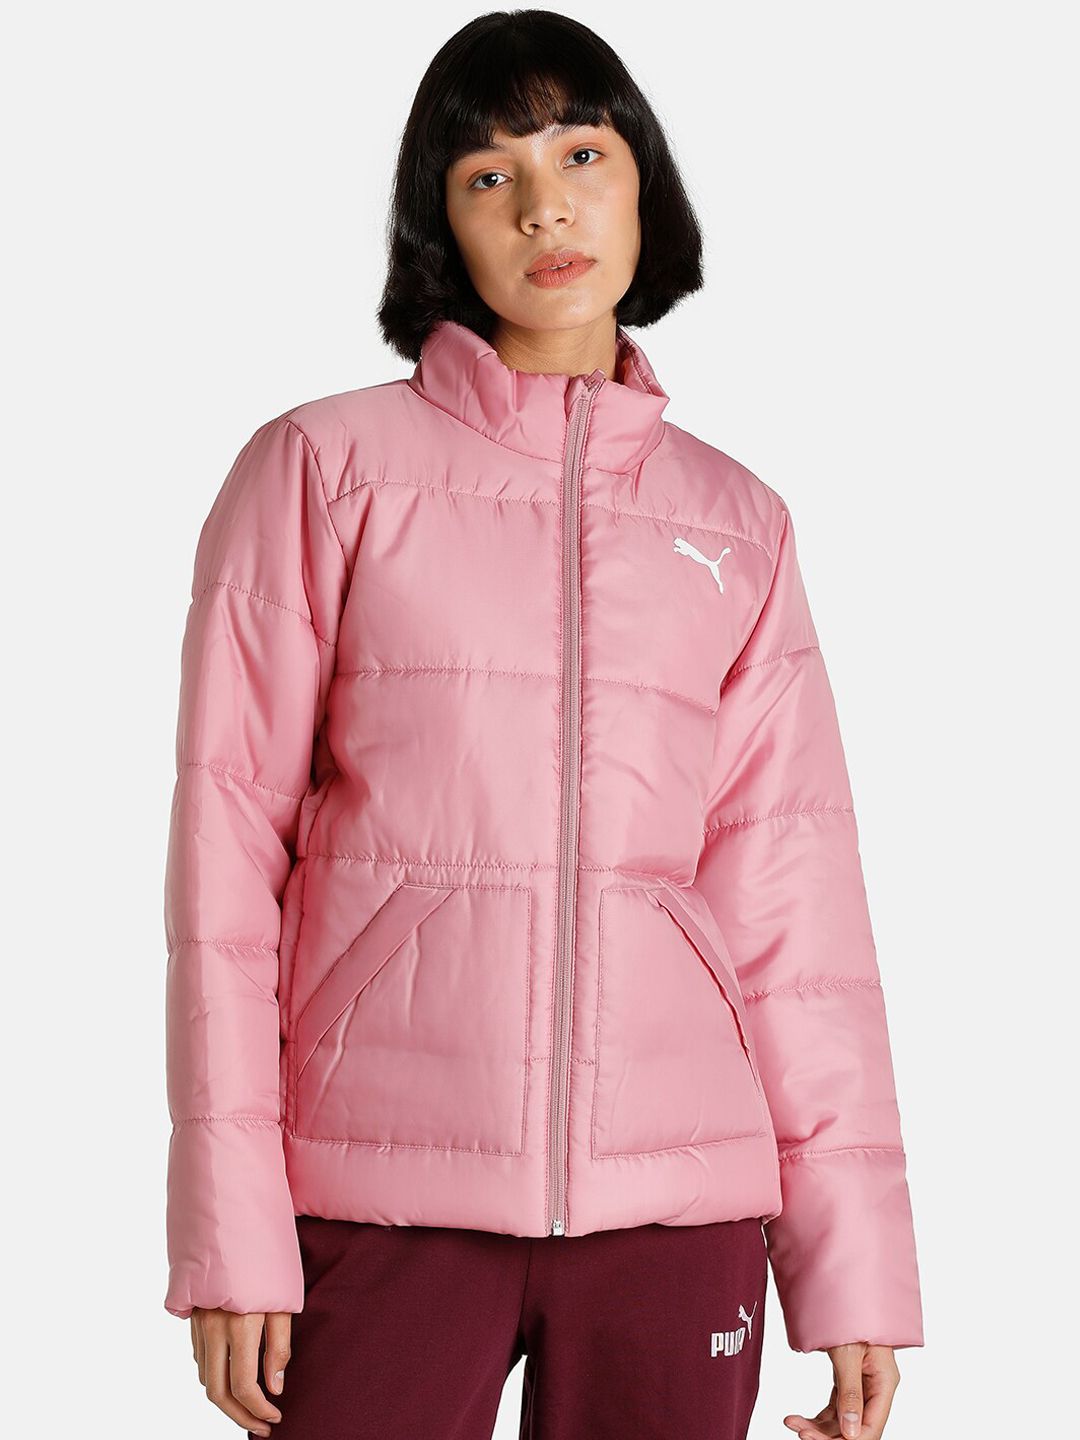 Puma Women Pink Padded Jacket Price in India